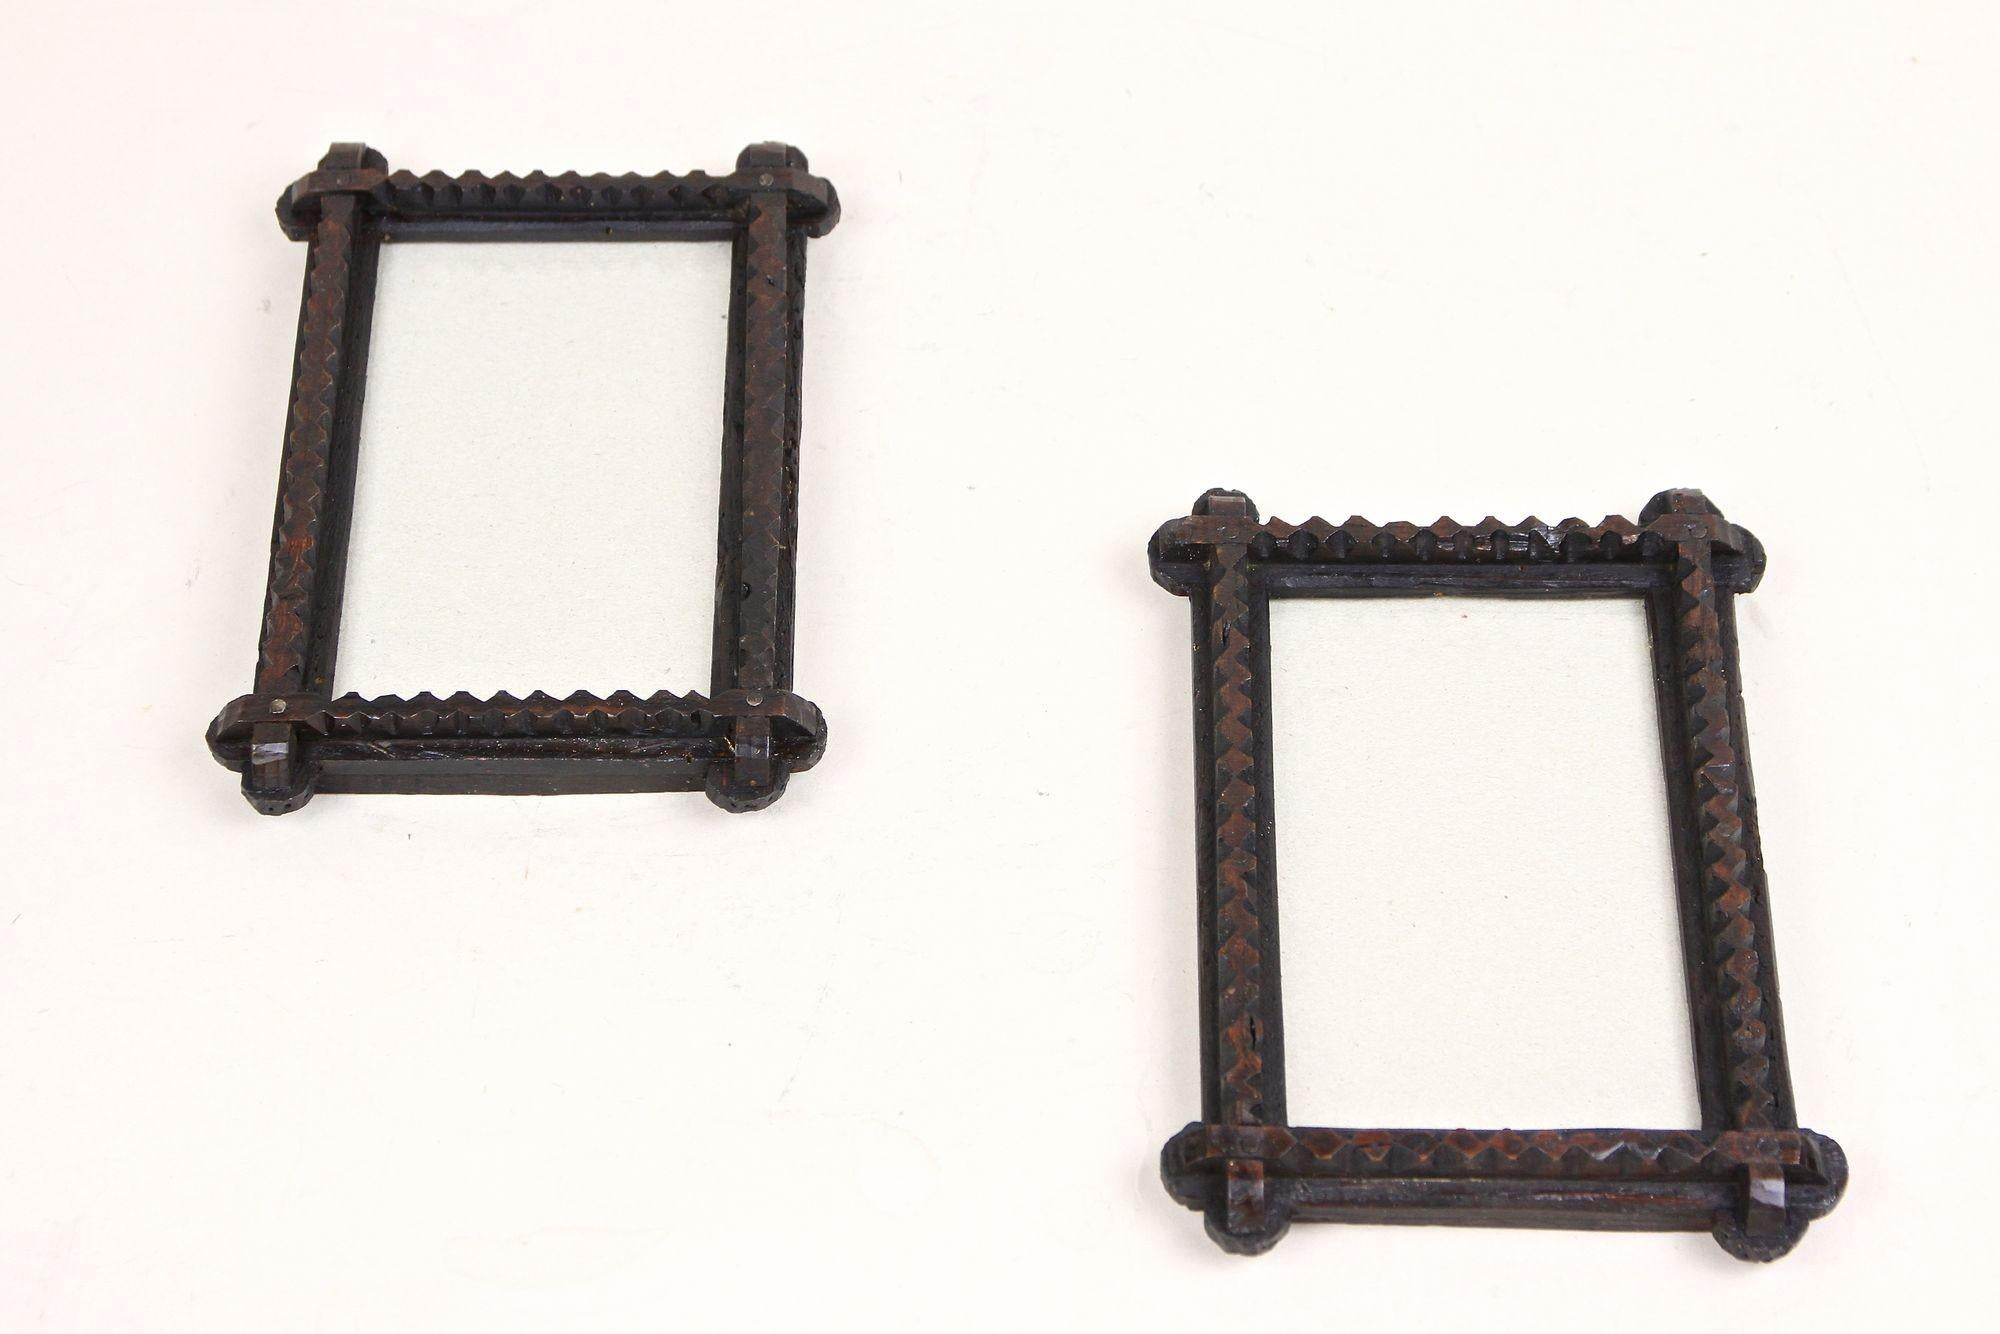 Dainty pair of rustic Tramp Art photo frames from the late 19th century, around 1860 in Austria. Elaborately hand carved out of bass wood this antique photo frames show a lovely design which the dark brown almost black stained surfaces reinforces.